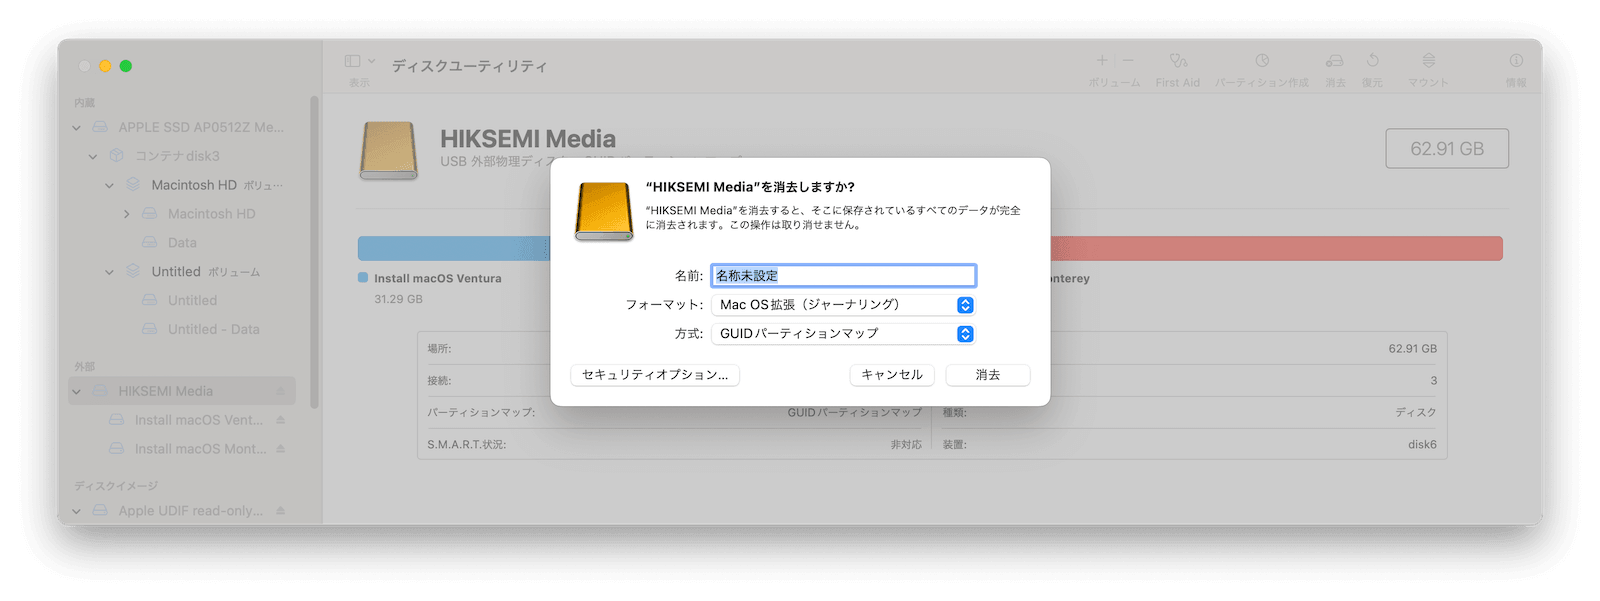 format-drive-disk-utility.png